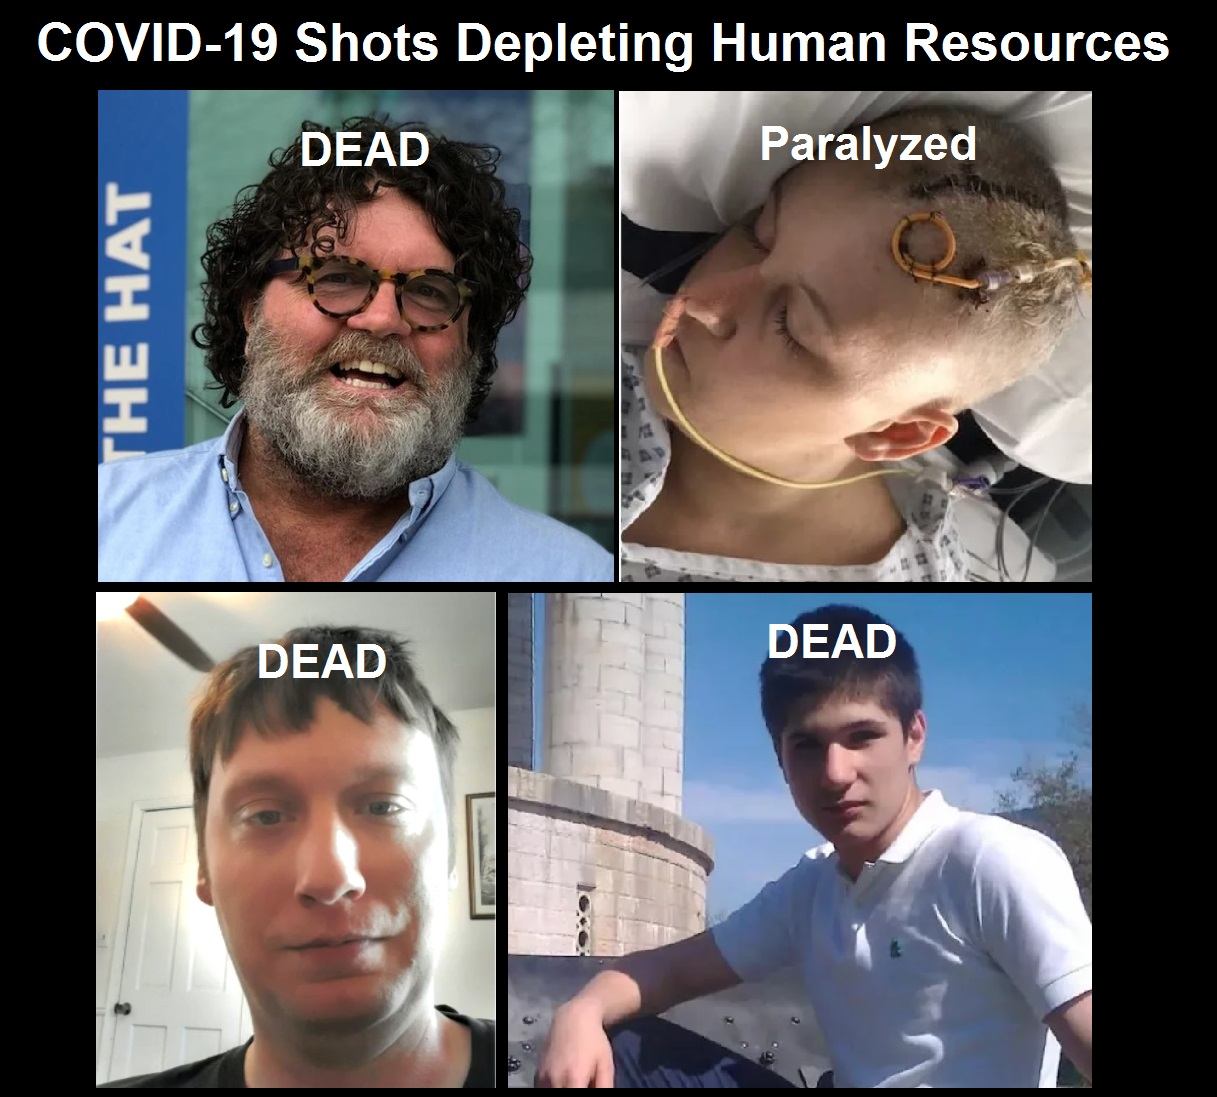 Covid shots depleting human resources | 76,253 dead 6,033,218 injured recorded in europe and usa following covid vaccines with 4,358 fetal deaths in u.s. | health